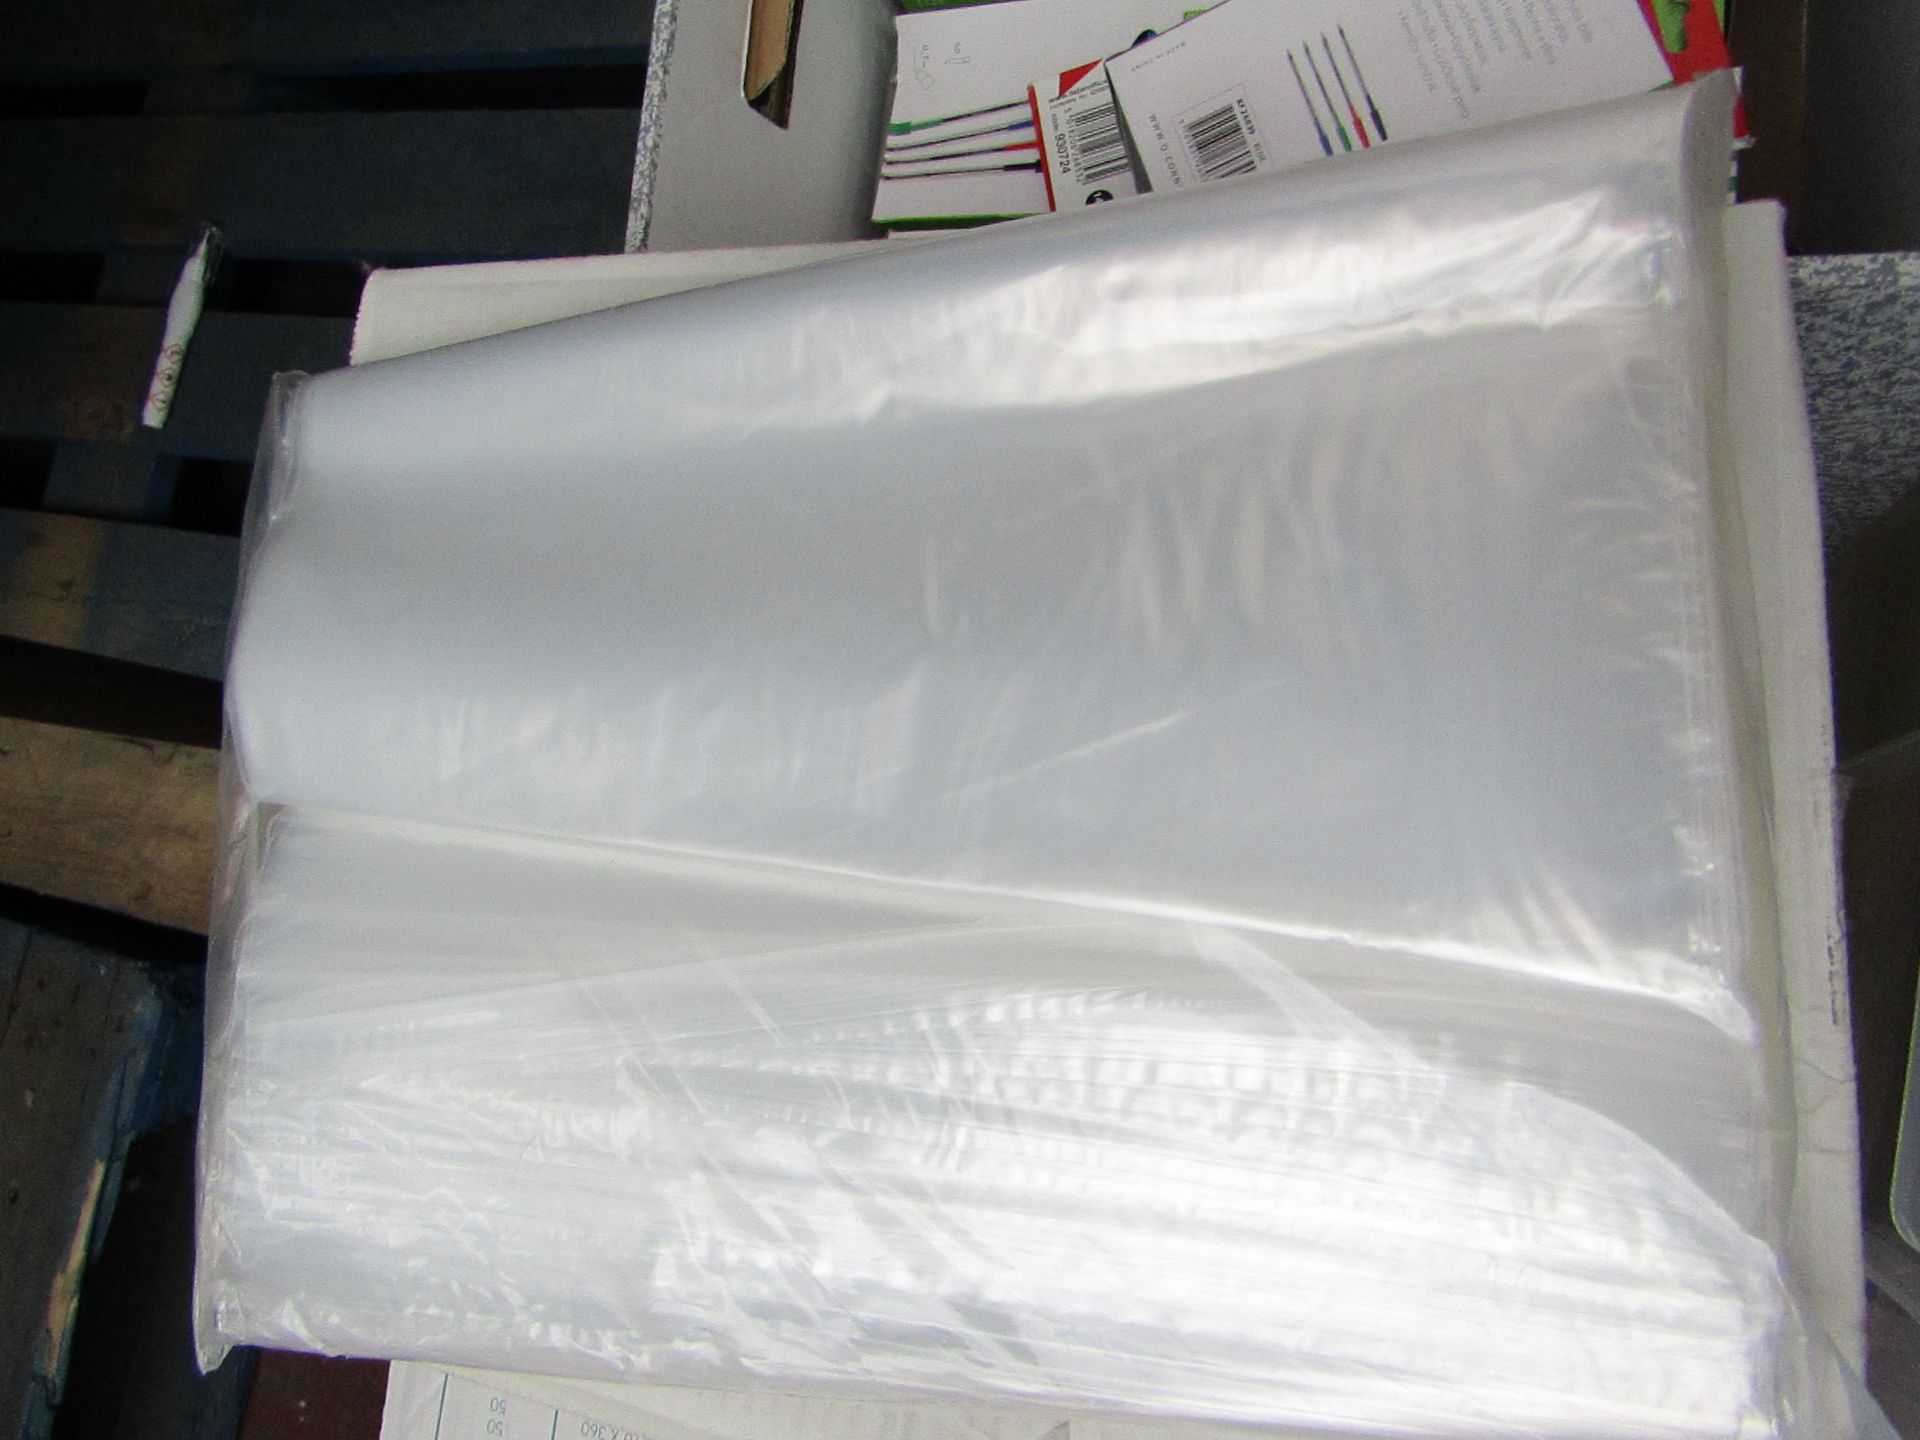 Boix of approx 1000x 13"x18" grip seal clear bags.